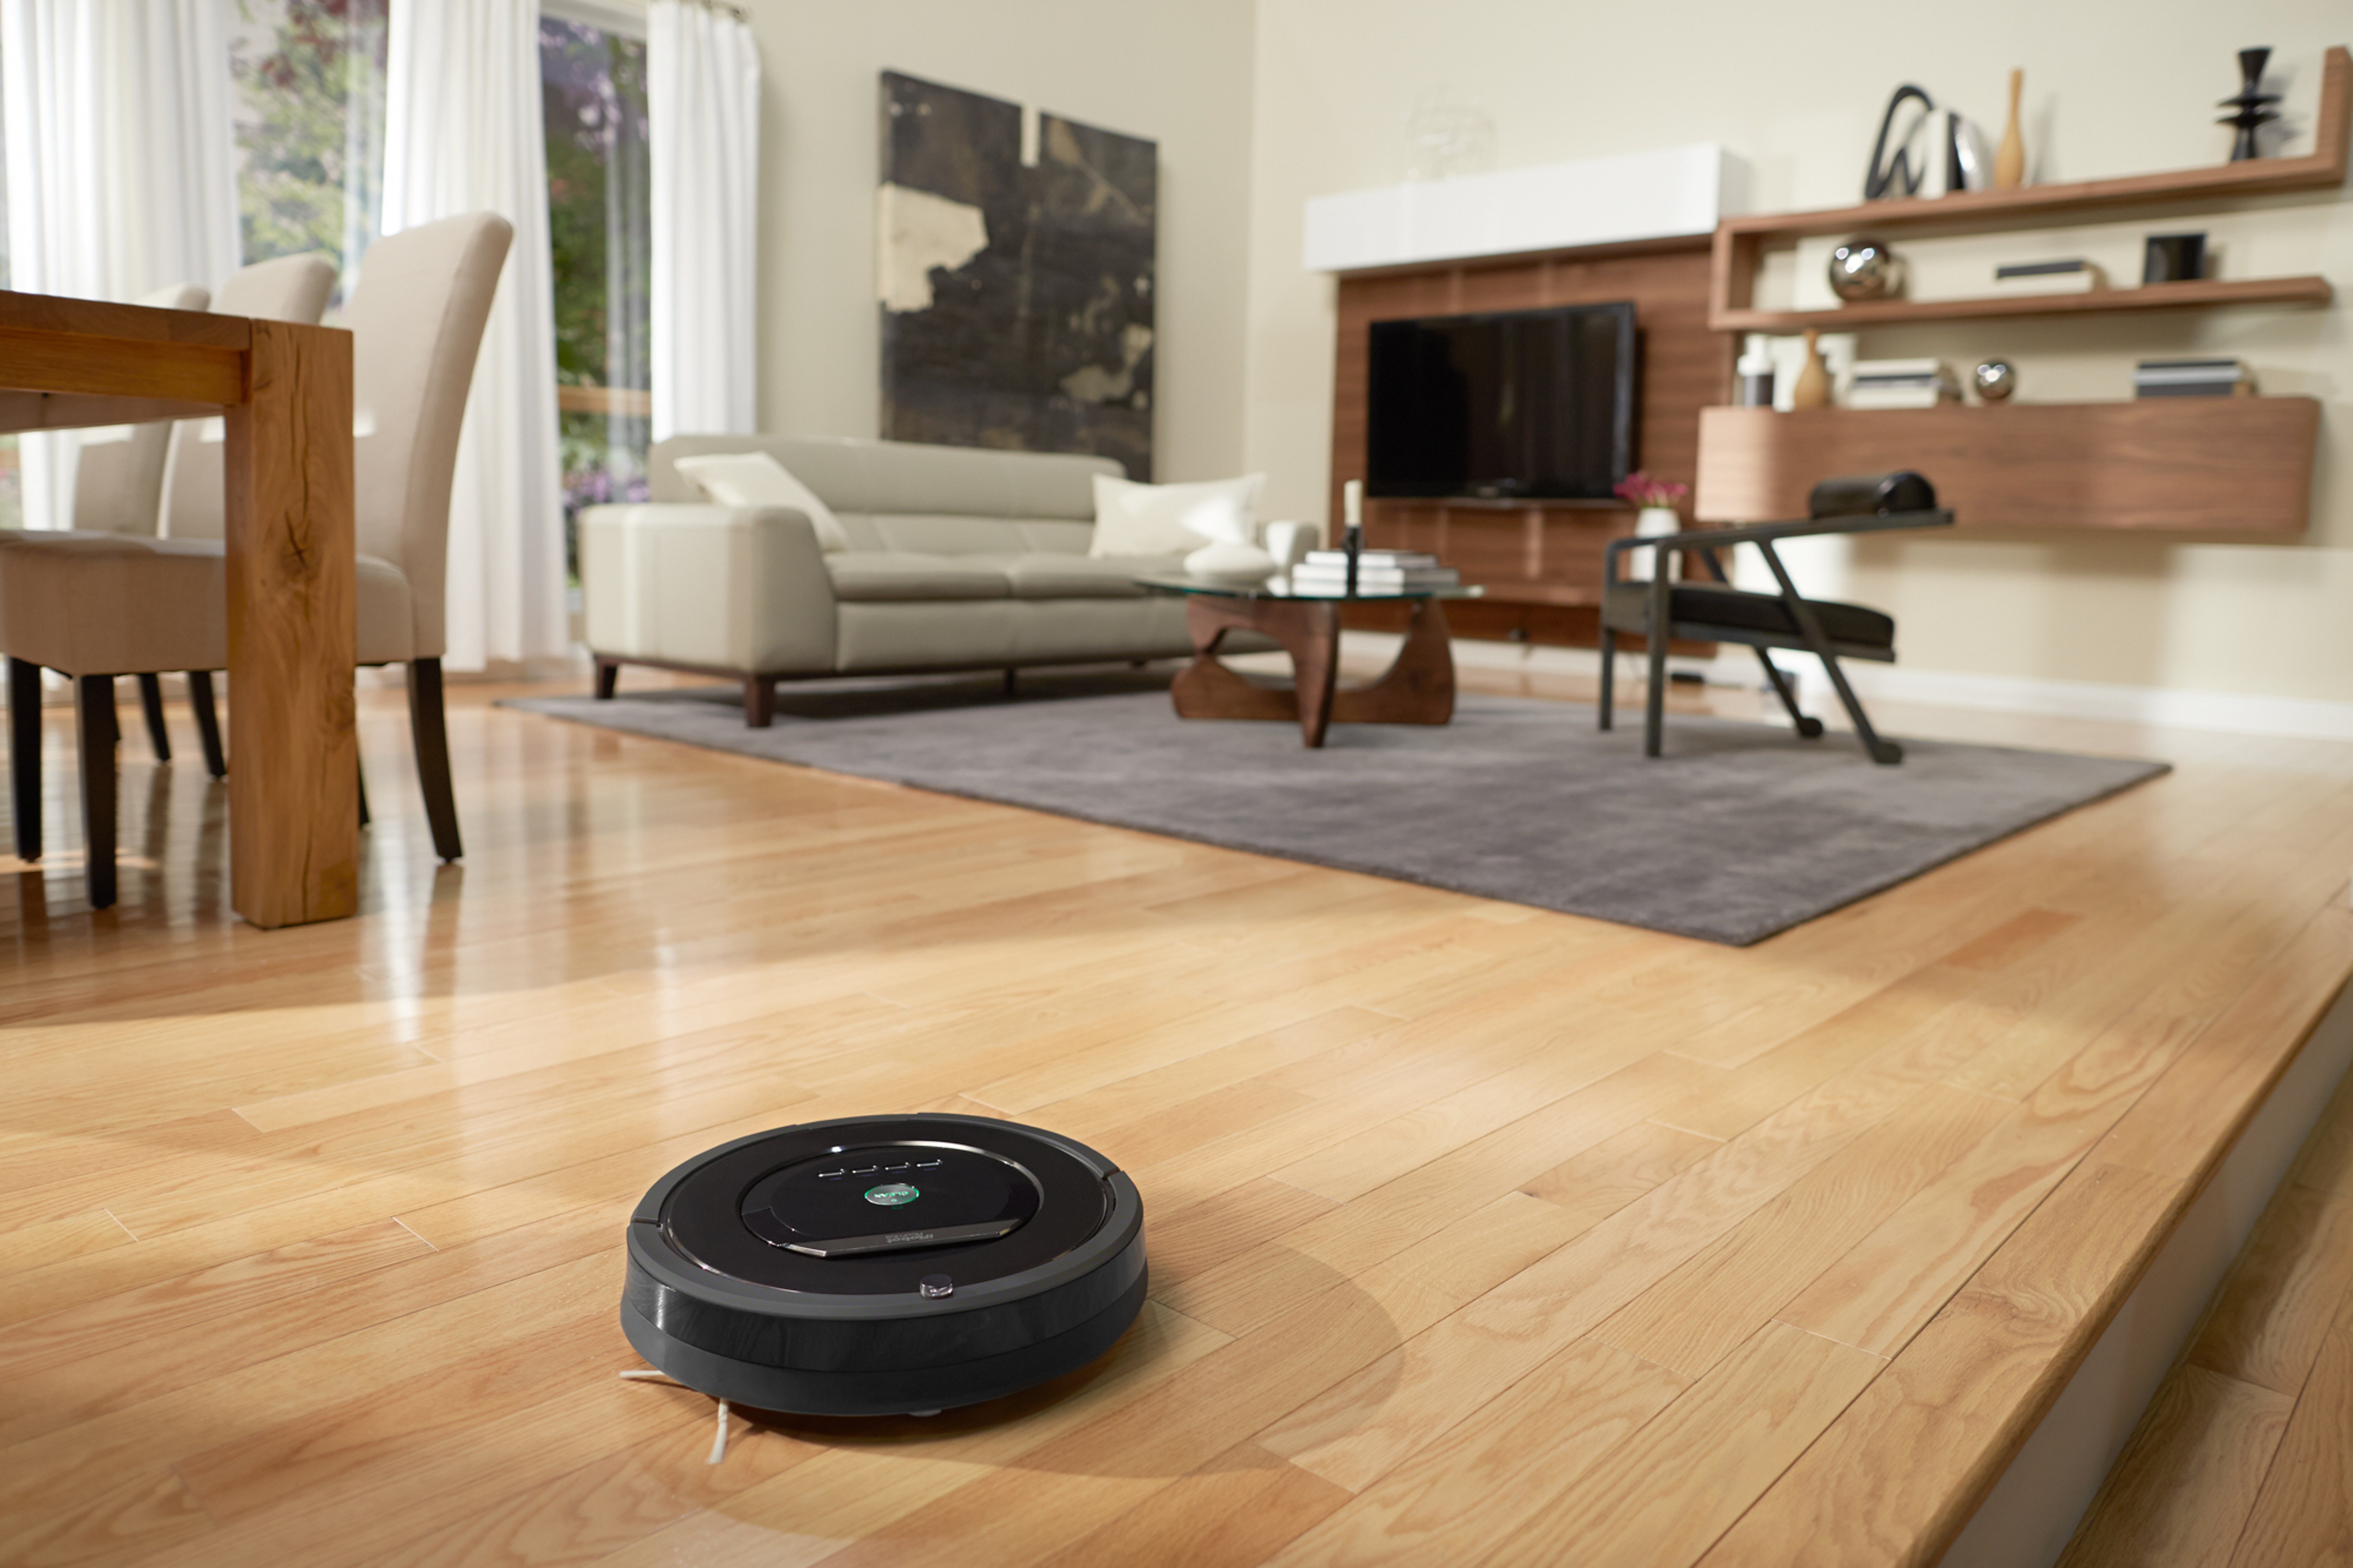 Analysts: iRobot Will Struggle Due To Trade Issues, Increasing Competition